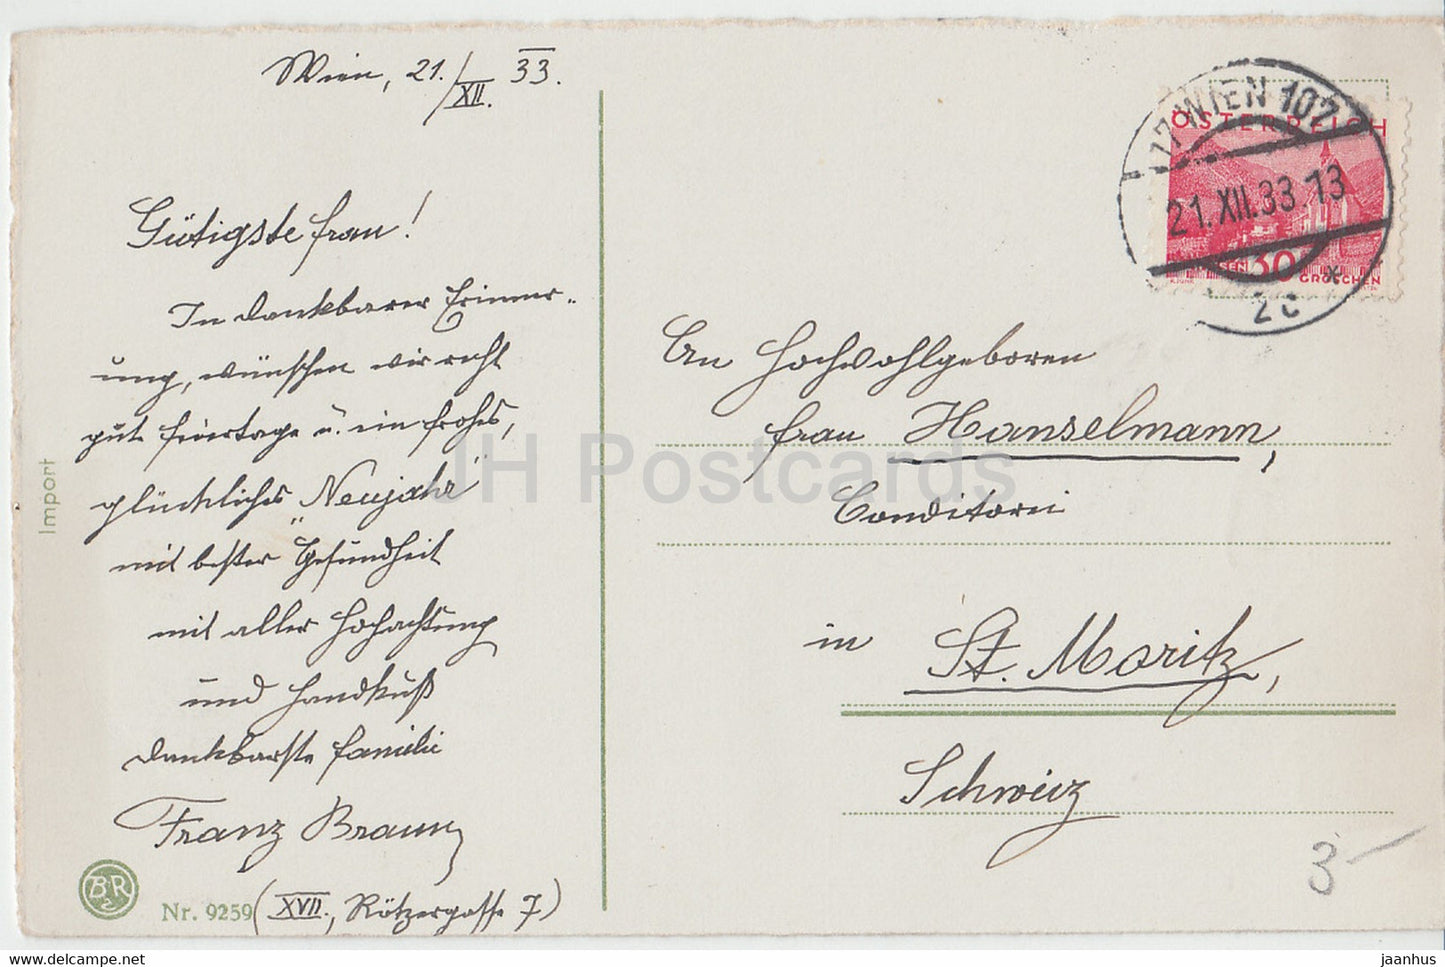 Christmas Greeting Card - Ein Frohes Weihnachtsfest - church - BR 9259 - old postcard - 1933 - Germany - used